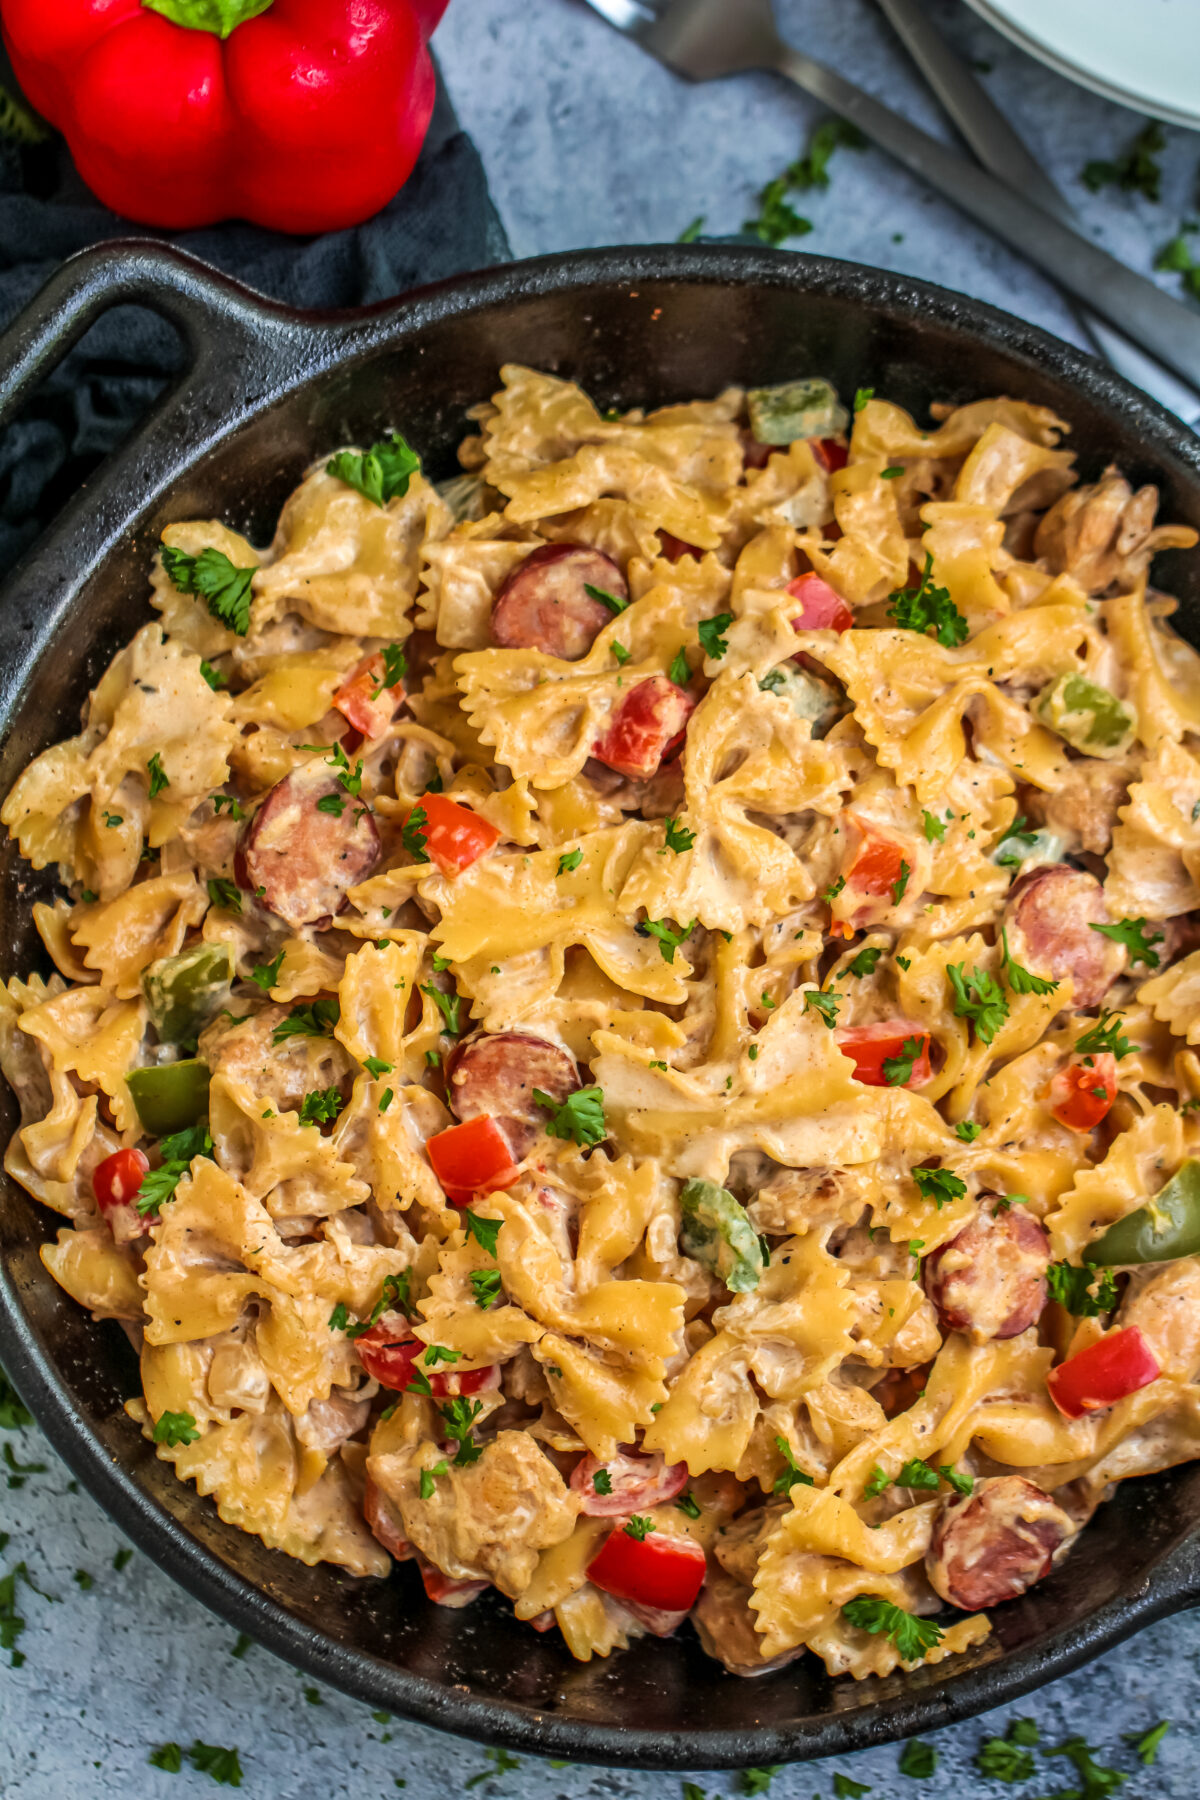 This Cajun Chicken Alfredo Pasta Recipe is a spicy take on a creamy classic. The best of both worlds in one easy dish with Andouille sausage!